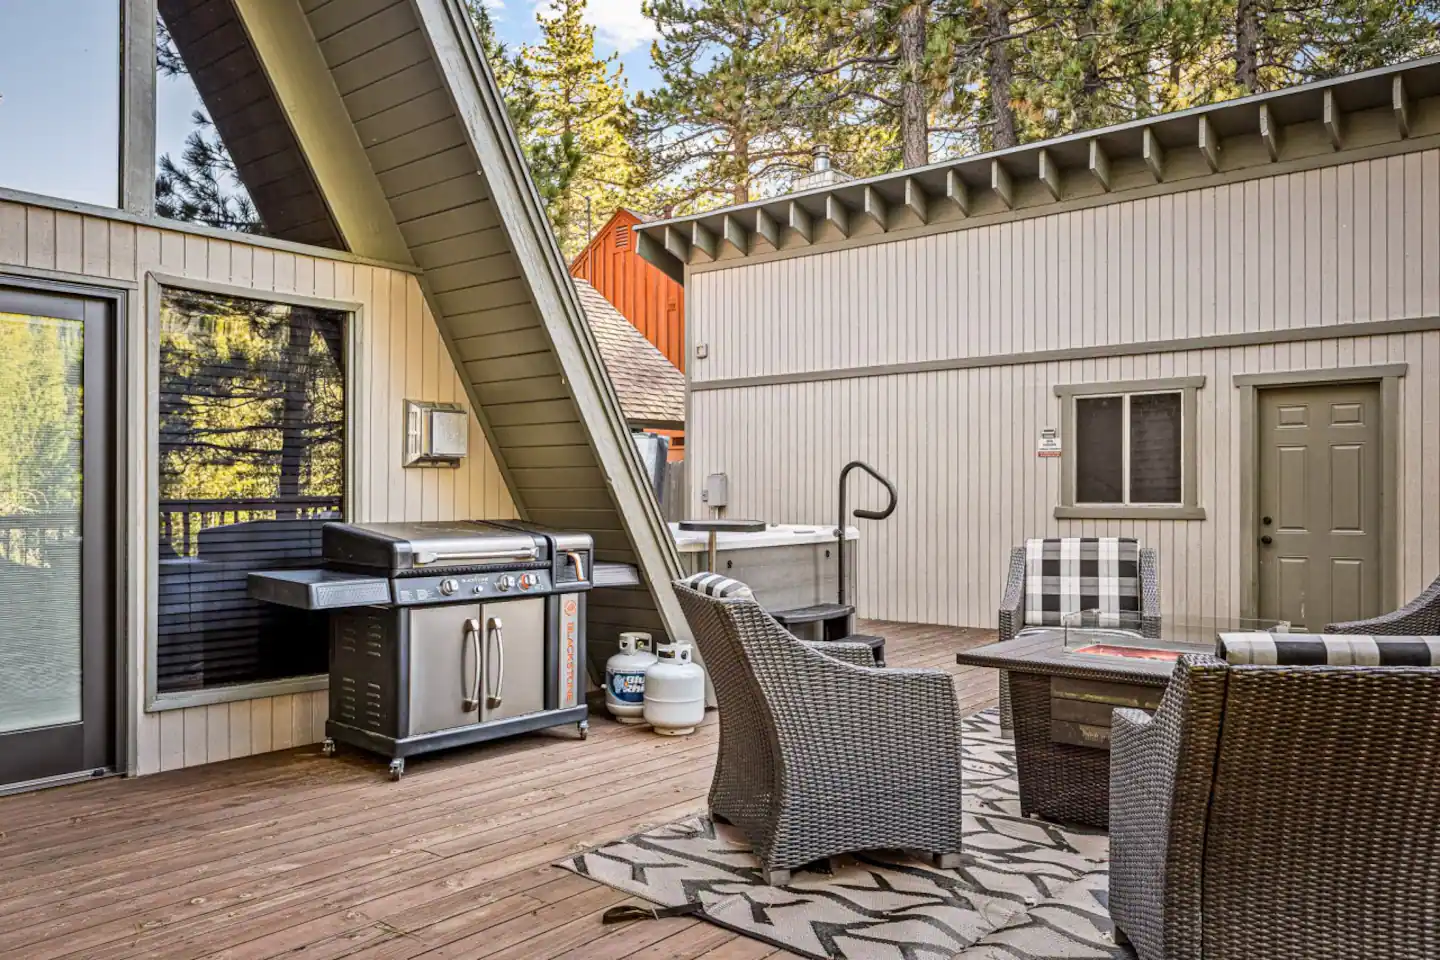 039 Treehouse Cottage A-Frame Big Bear Vacation Rentals